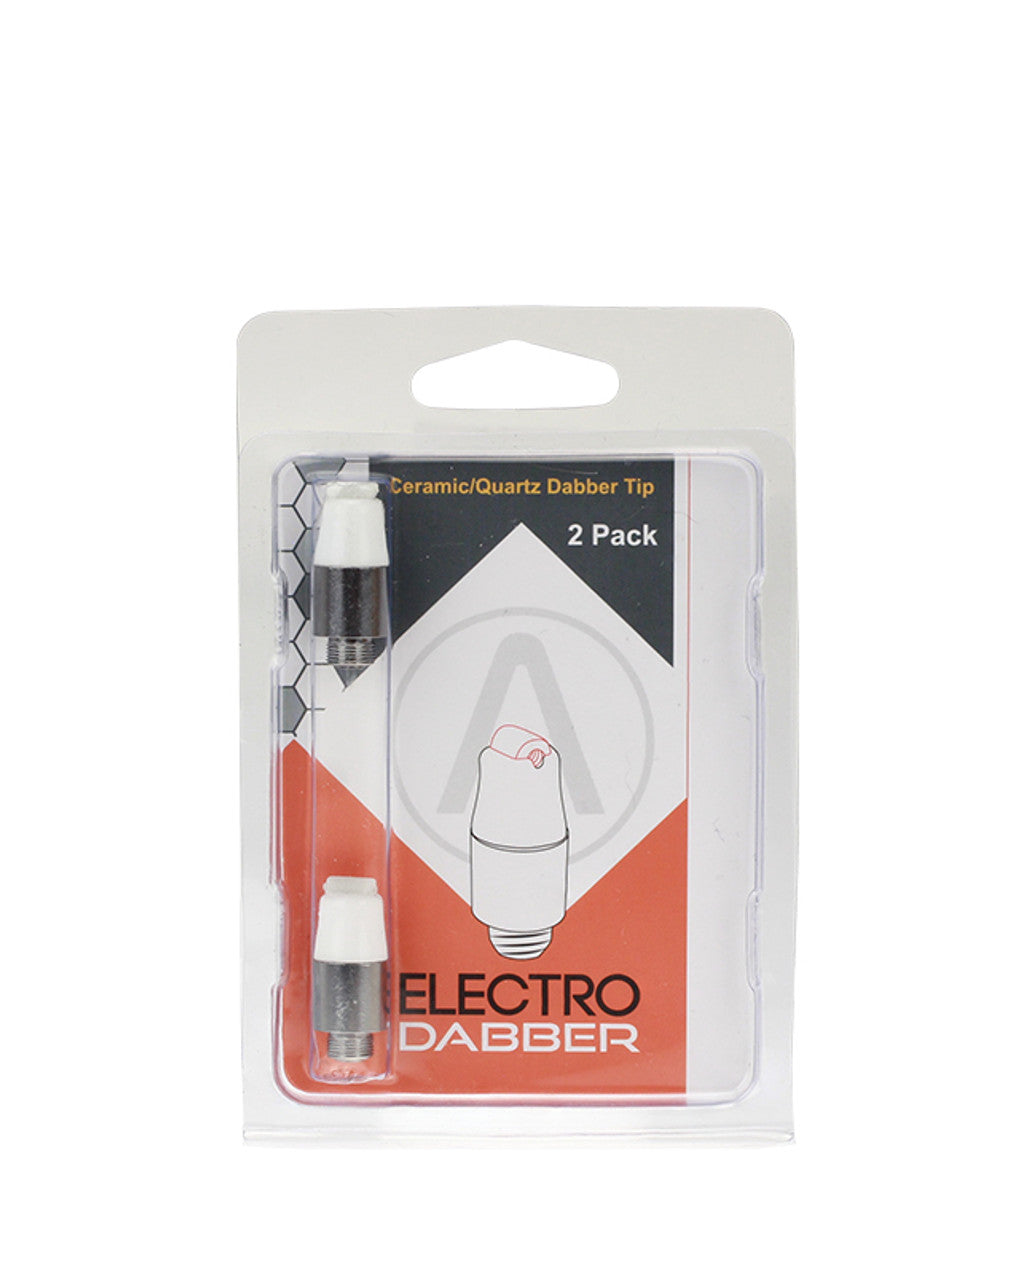 Atmos Electro Dabber 2-Pack with Ceramic/Quartz Heating Tips for Vaporizers, Front View